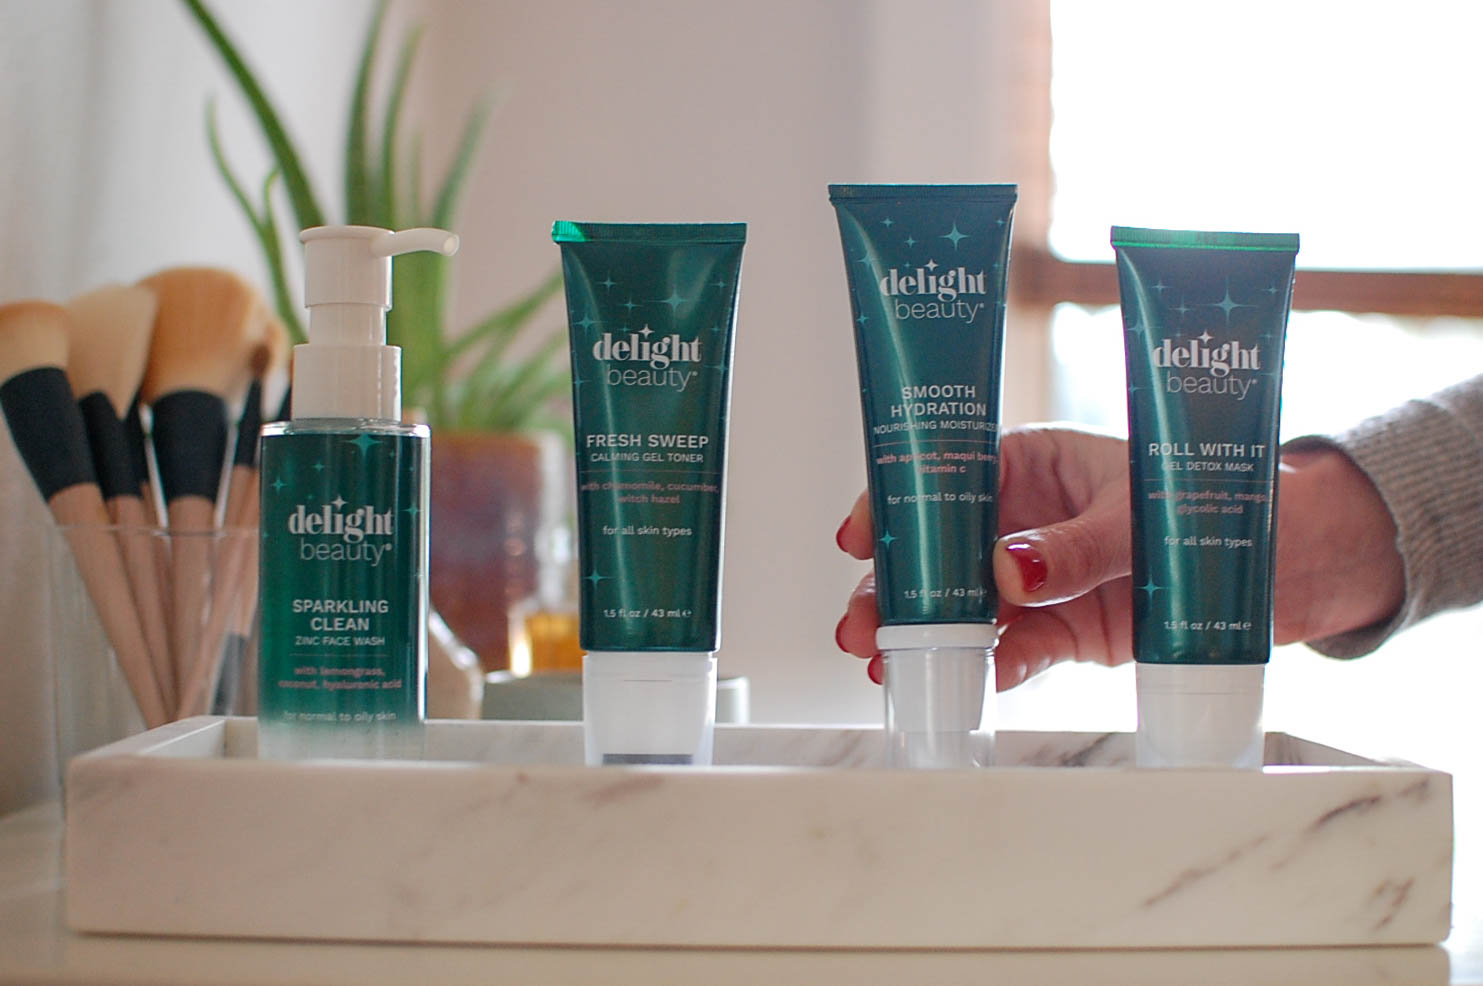 Delight Beauty Skincare Brings Delight To My Daily Routine